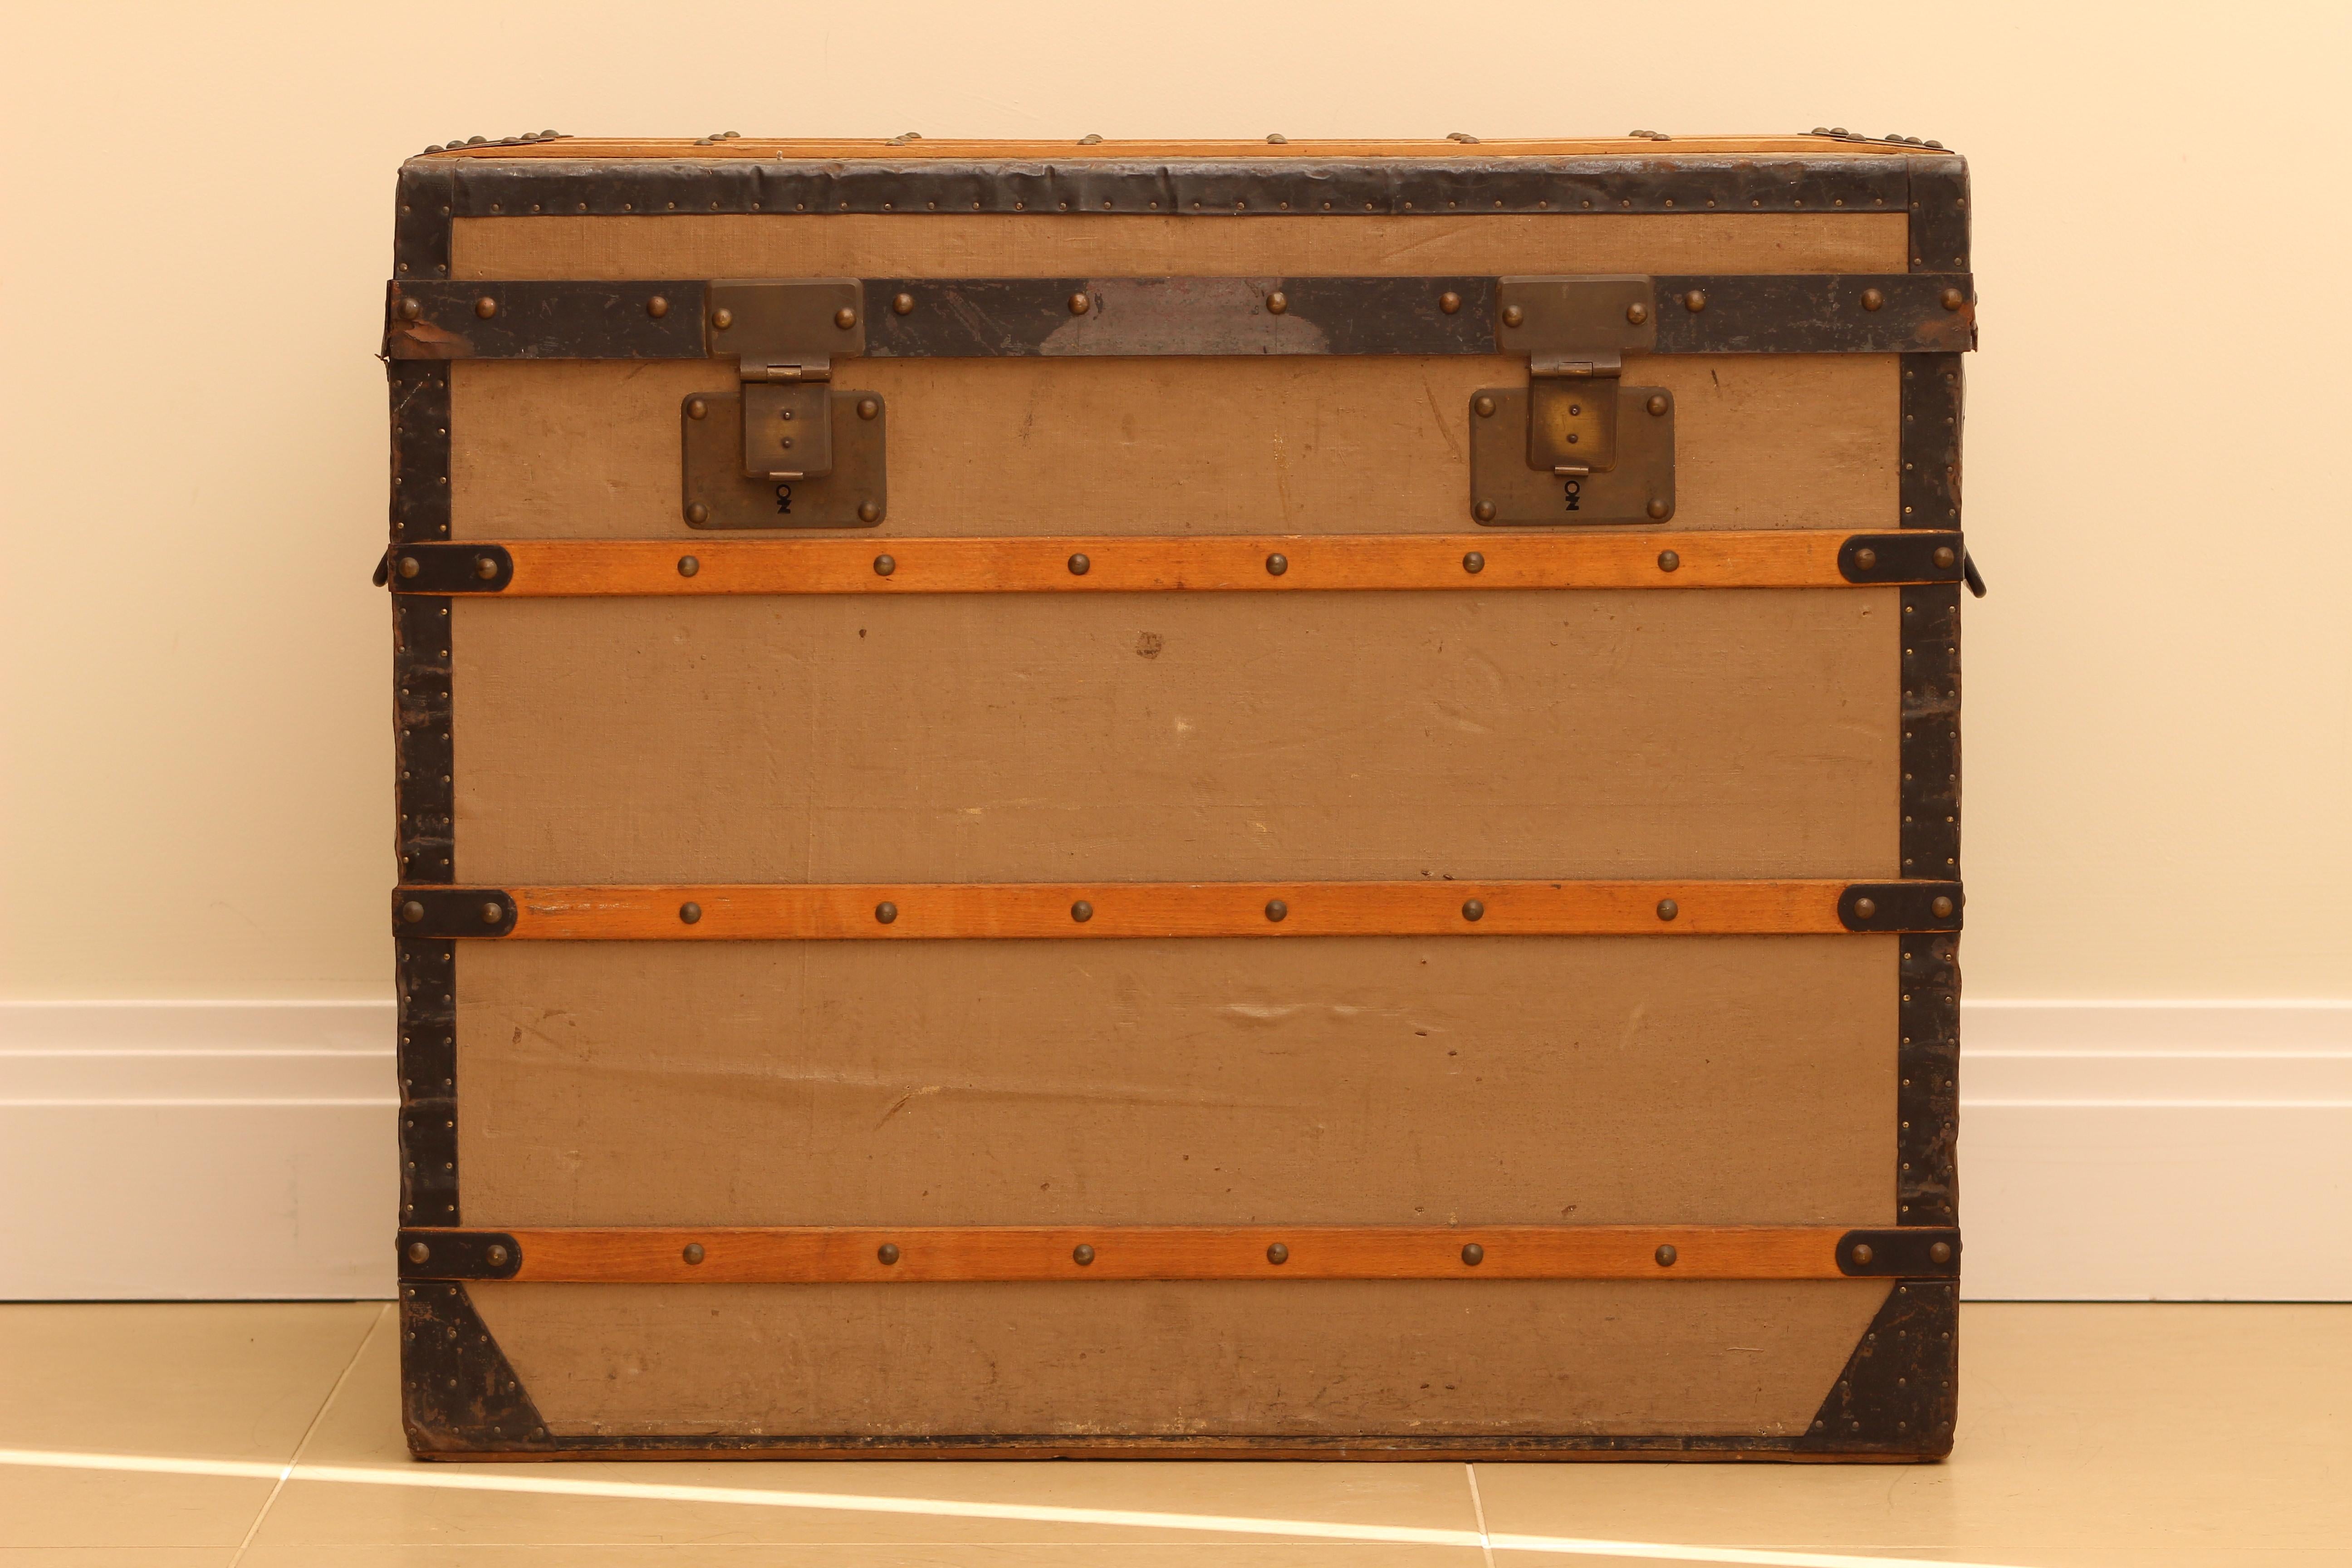 A Louis Vuitton Trianon trunk, identical to the one showcased at the Asnieres museum in Paris, stands as a testament to originality and preservation. 
This specific model mirrors the pristine condition of the piece displayed by Louis Vuitton. 
It's